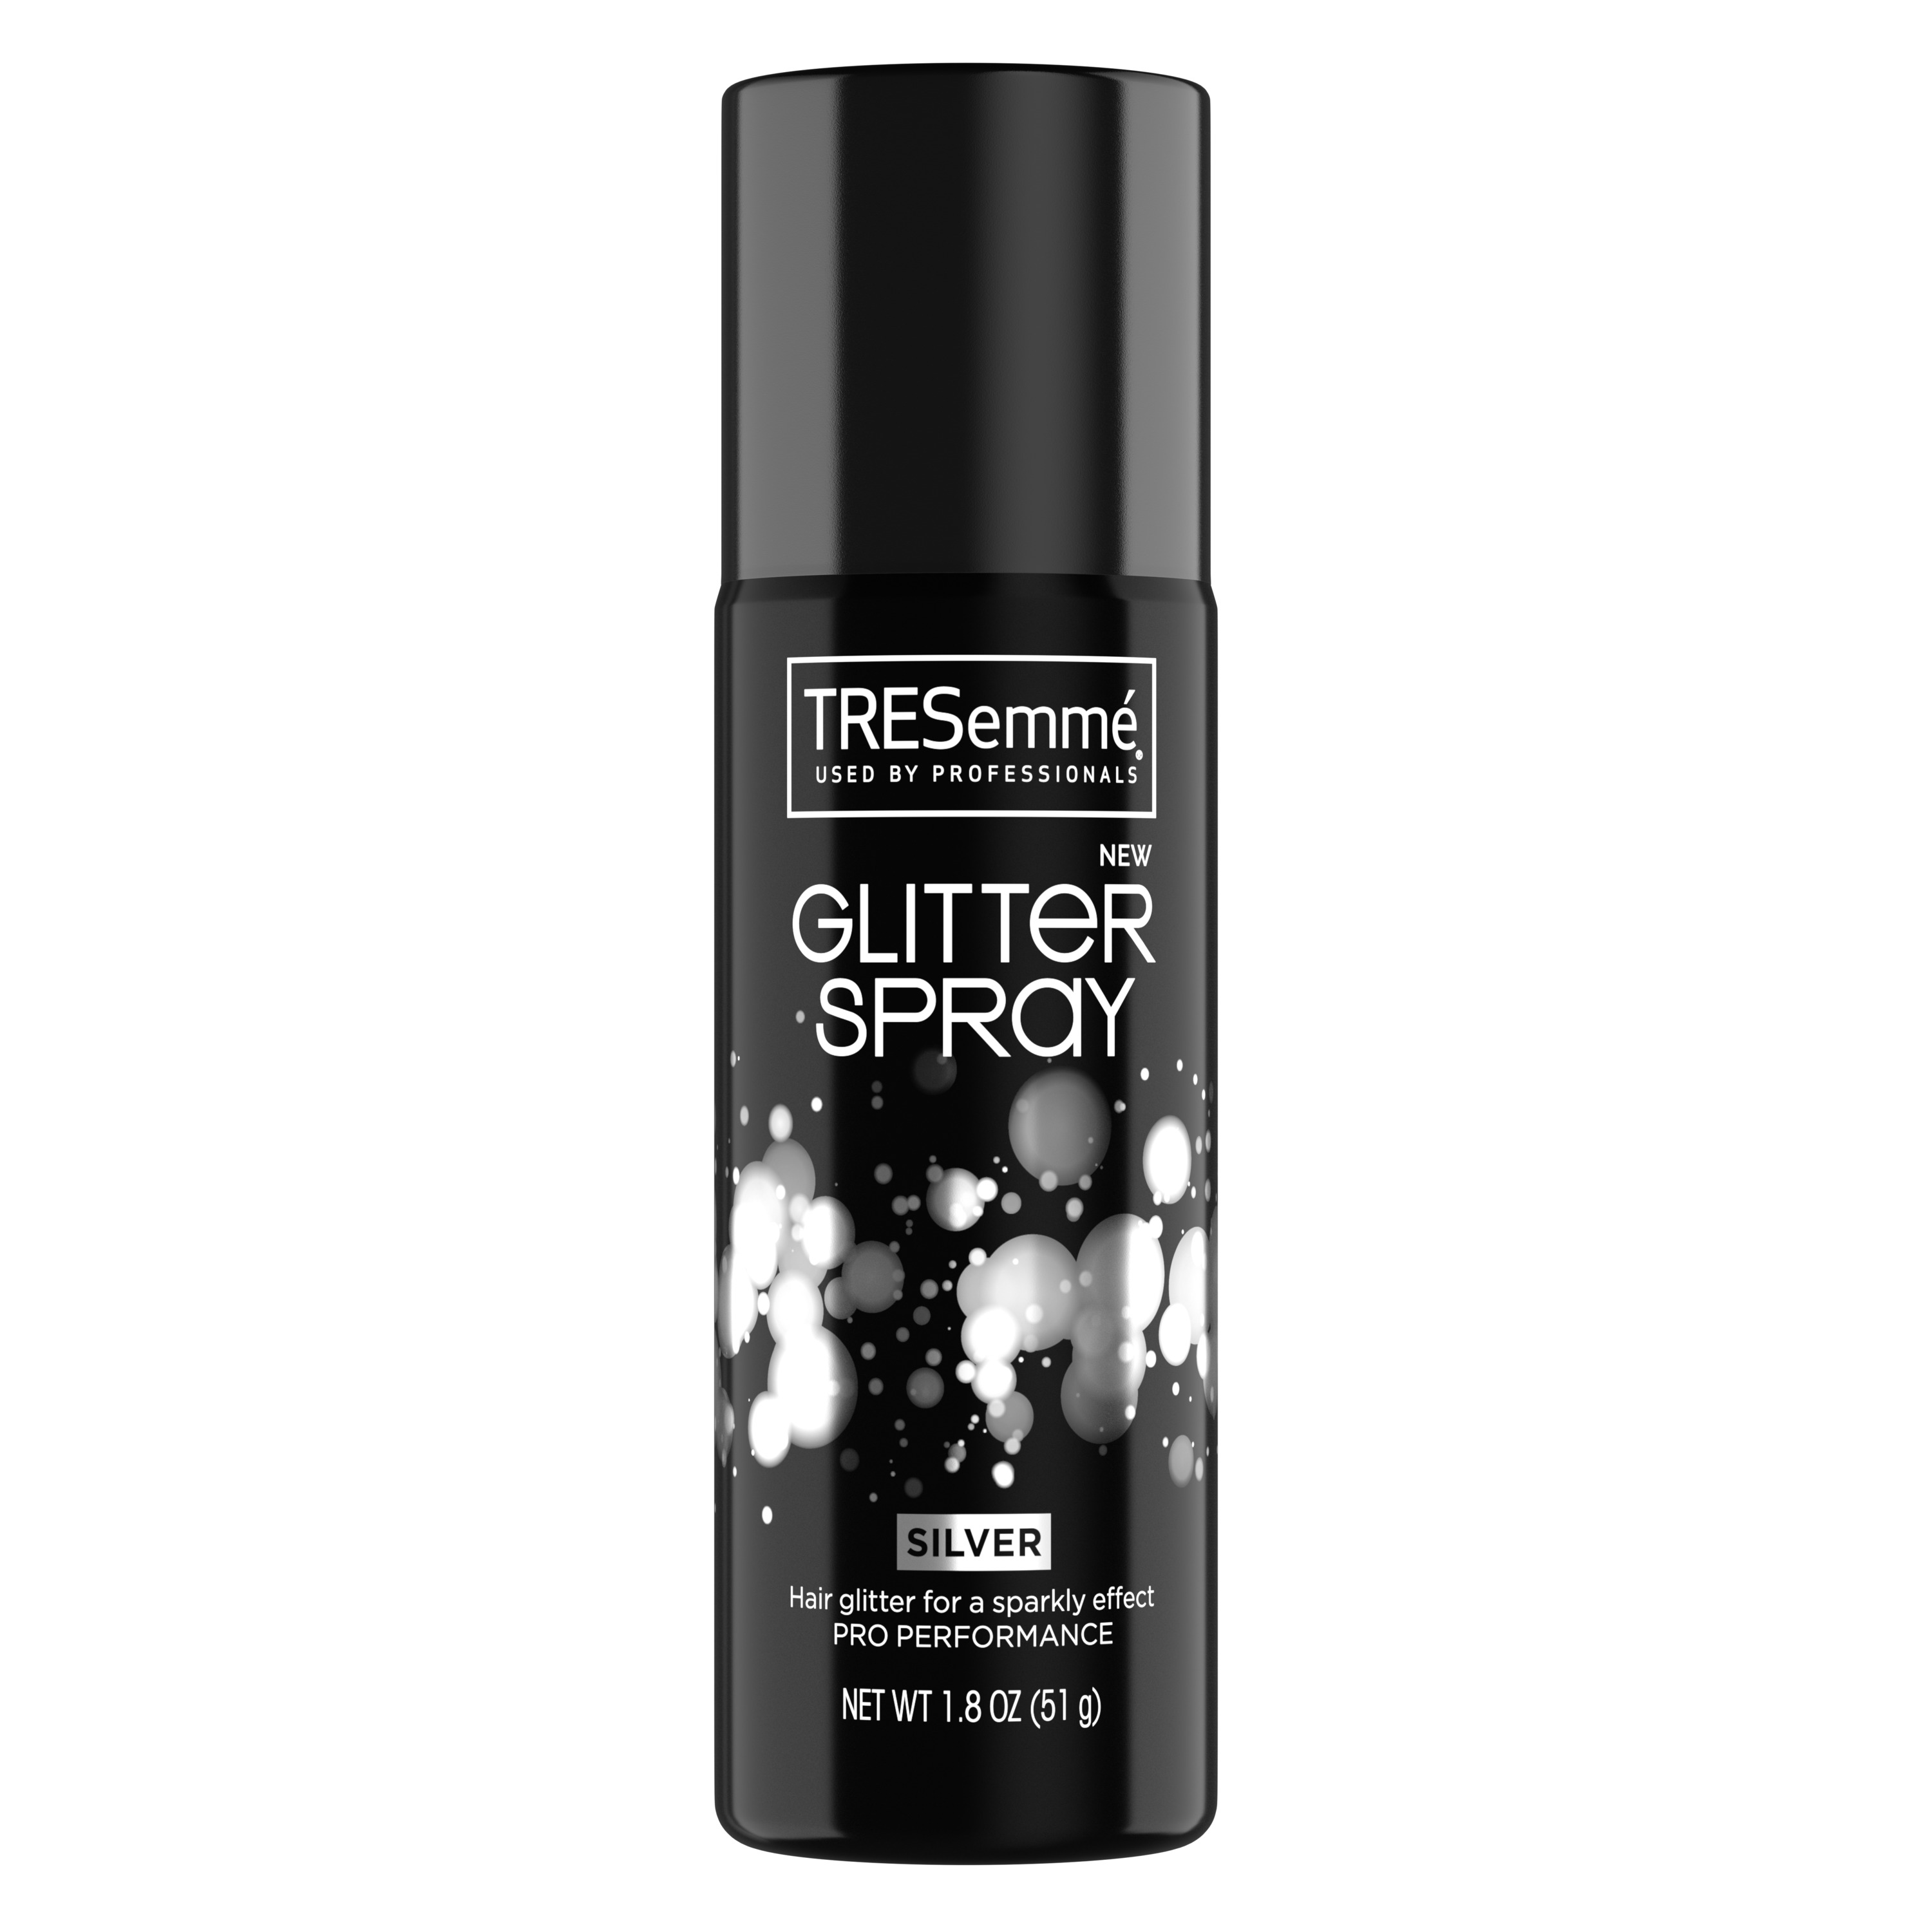 Tresemme Colored Hair Spray Silver 1.8 oz - image 2 of 4